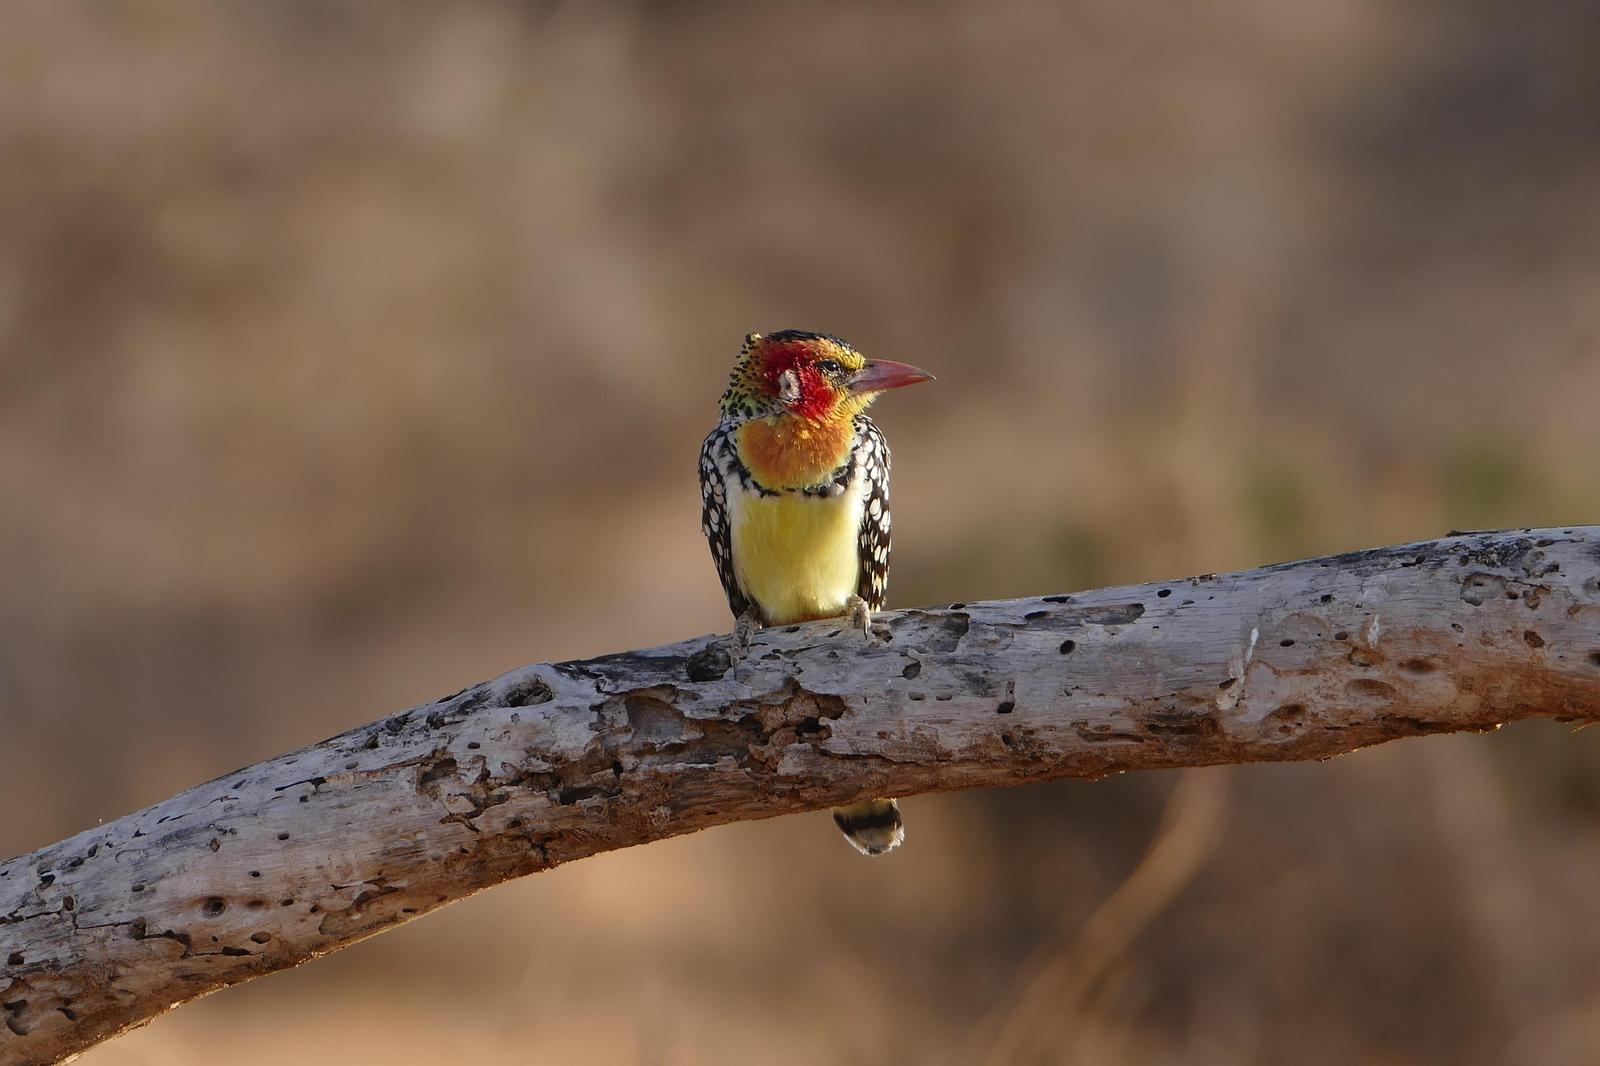 Red-and-yellow Barbet Photo by Randy Siebert